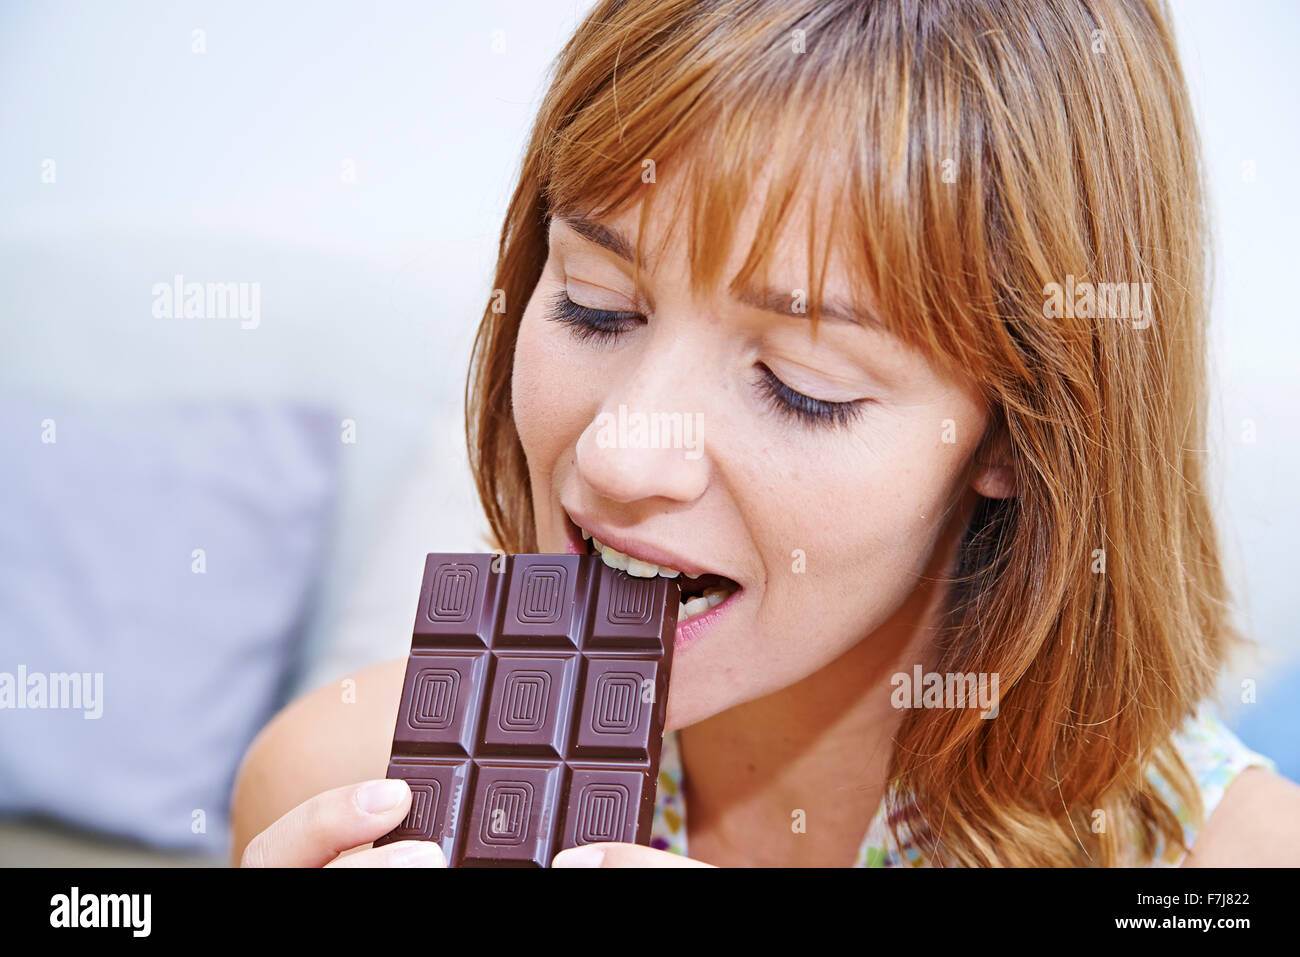 WOMAN EATING SWEETS Banque D'Images